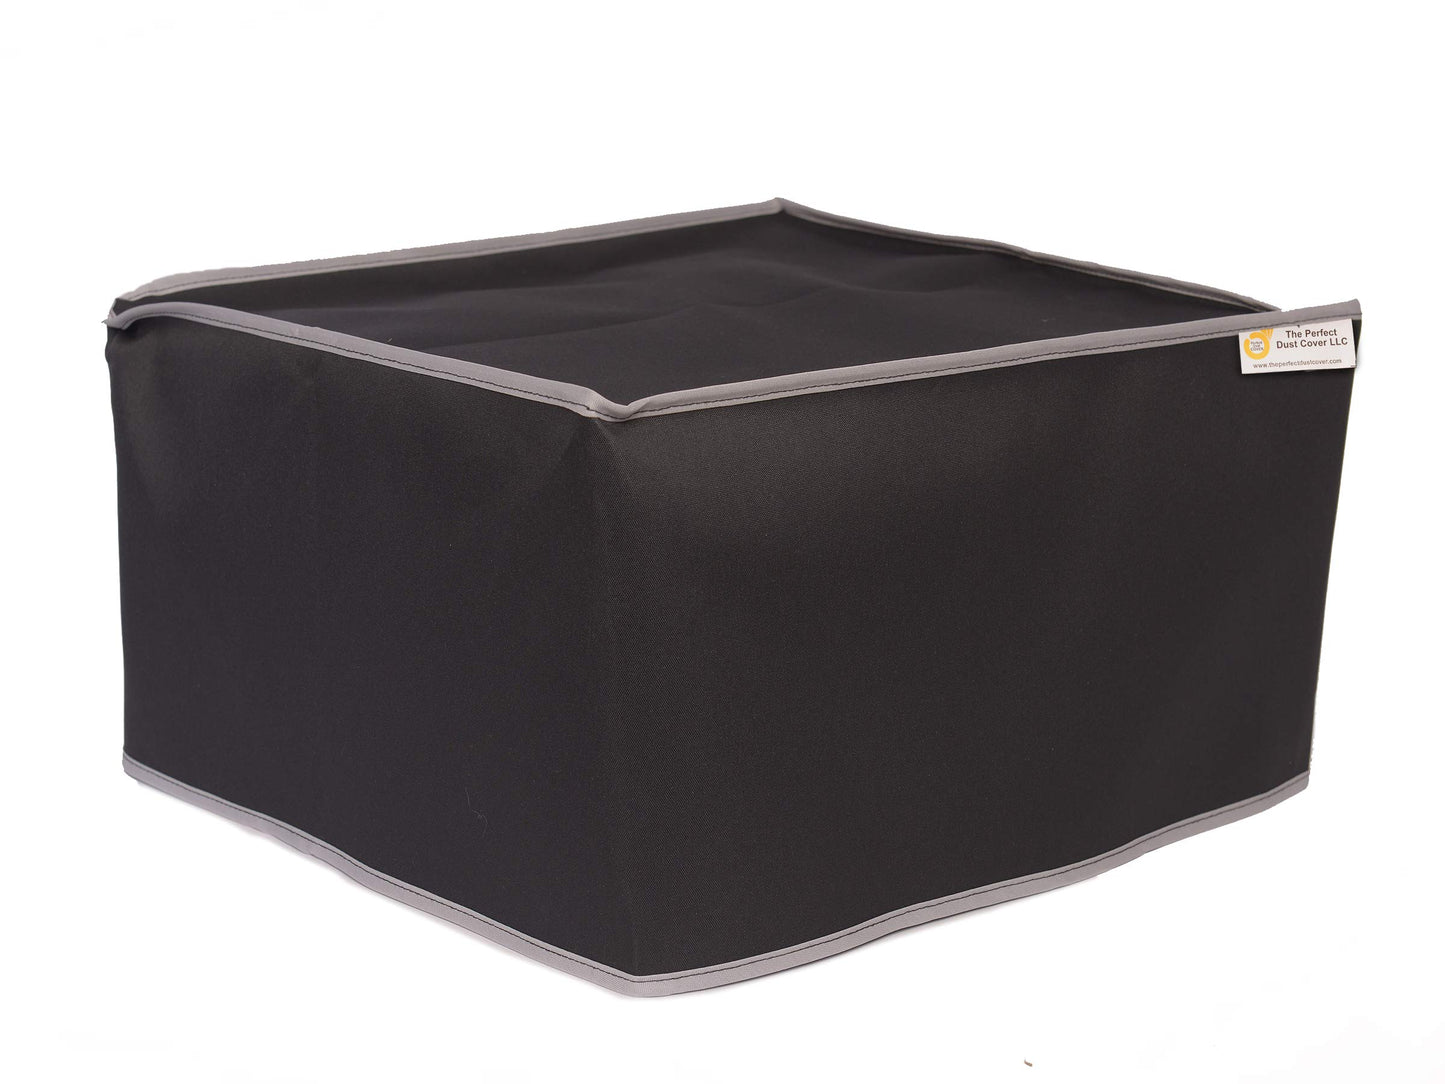 The Perfect Dust Cover, Black Nylon Cover for Formlabs Form 2 3D SLA Laser Printer, Anti Static Waterproof Cover Dimensions 13.6''W x 13''D x 20.5''H by The Perfect Dust Cover LLC